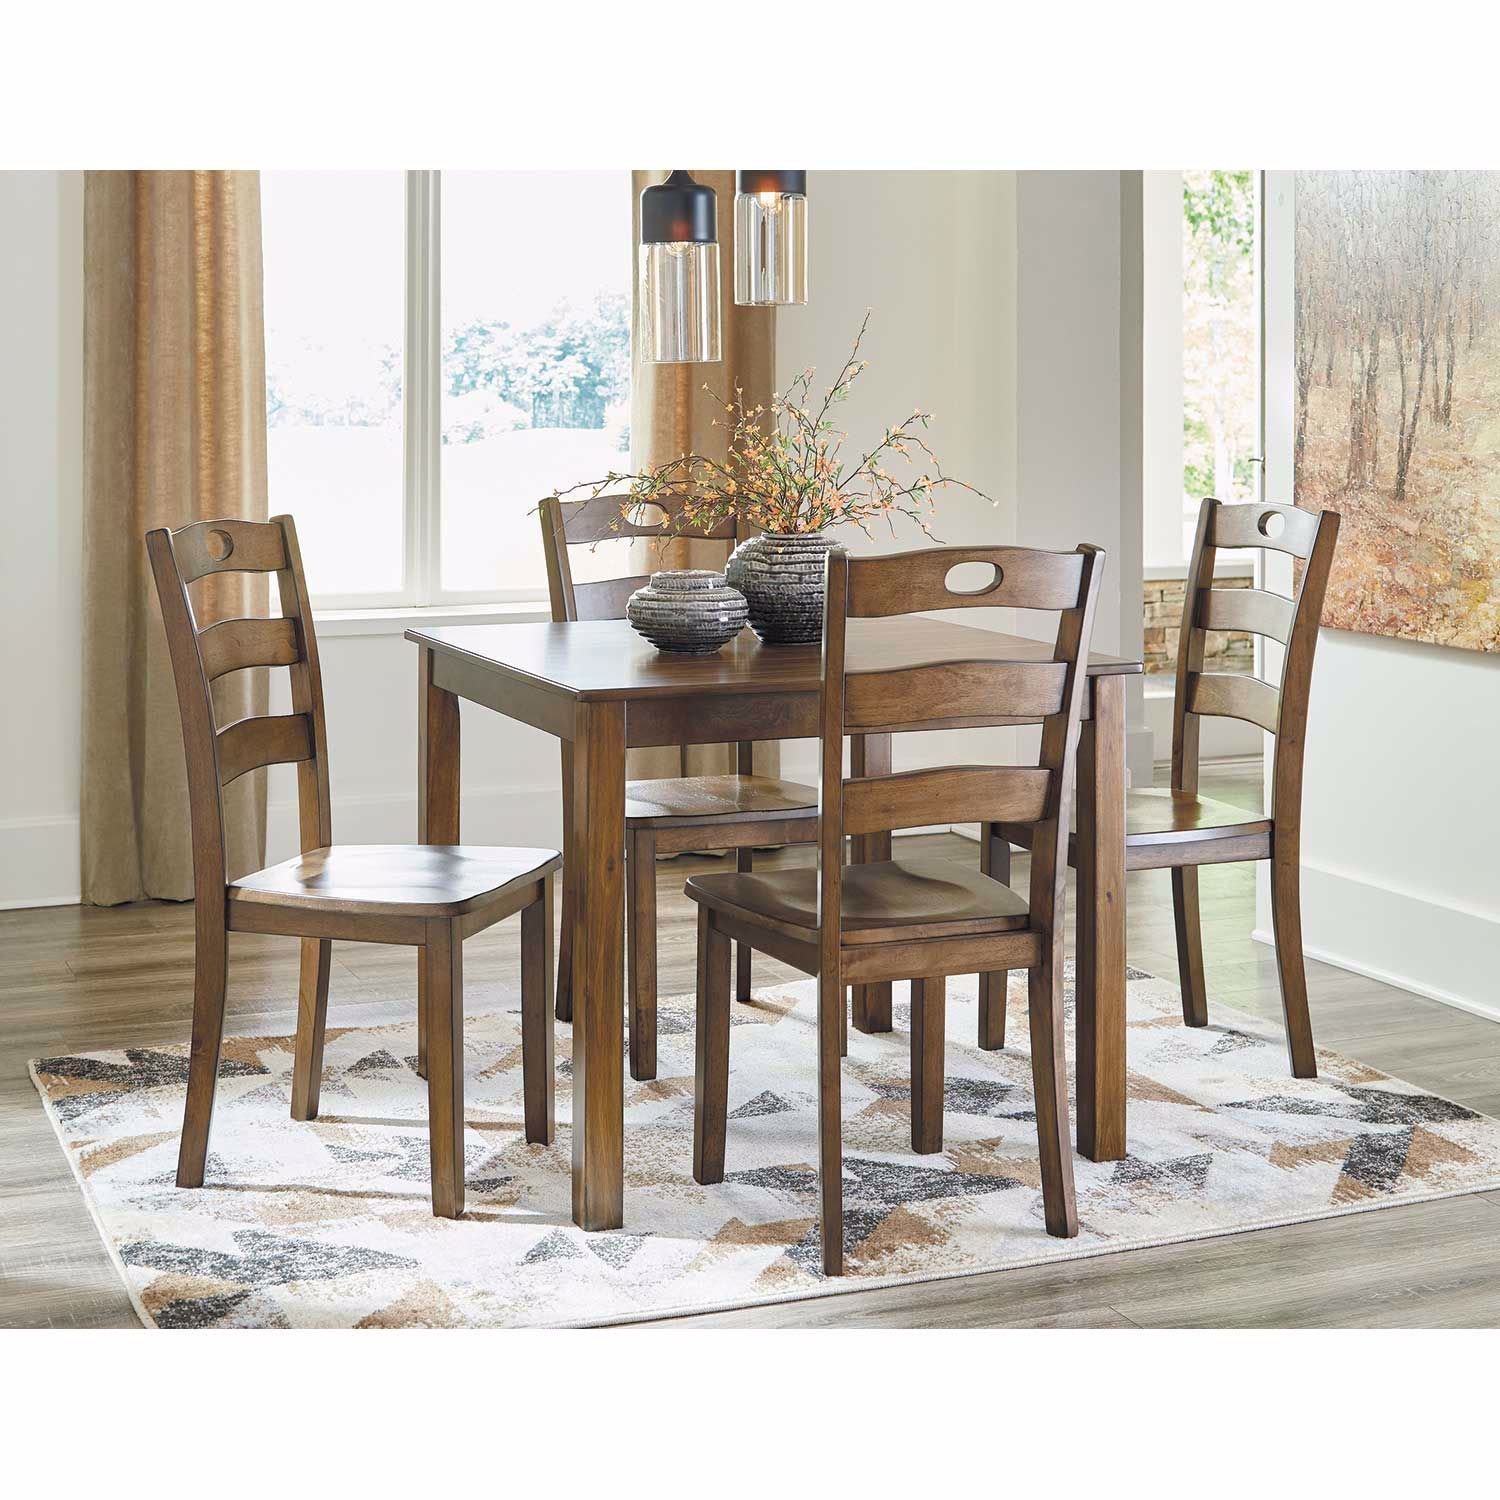 Home Kitchen Table Chair Sets Home Kitchen Ready To Live